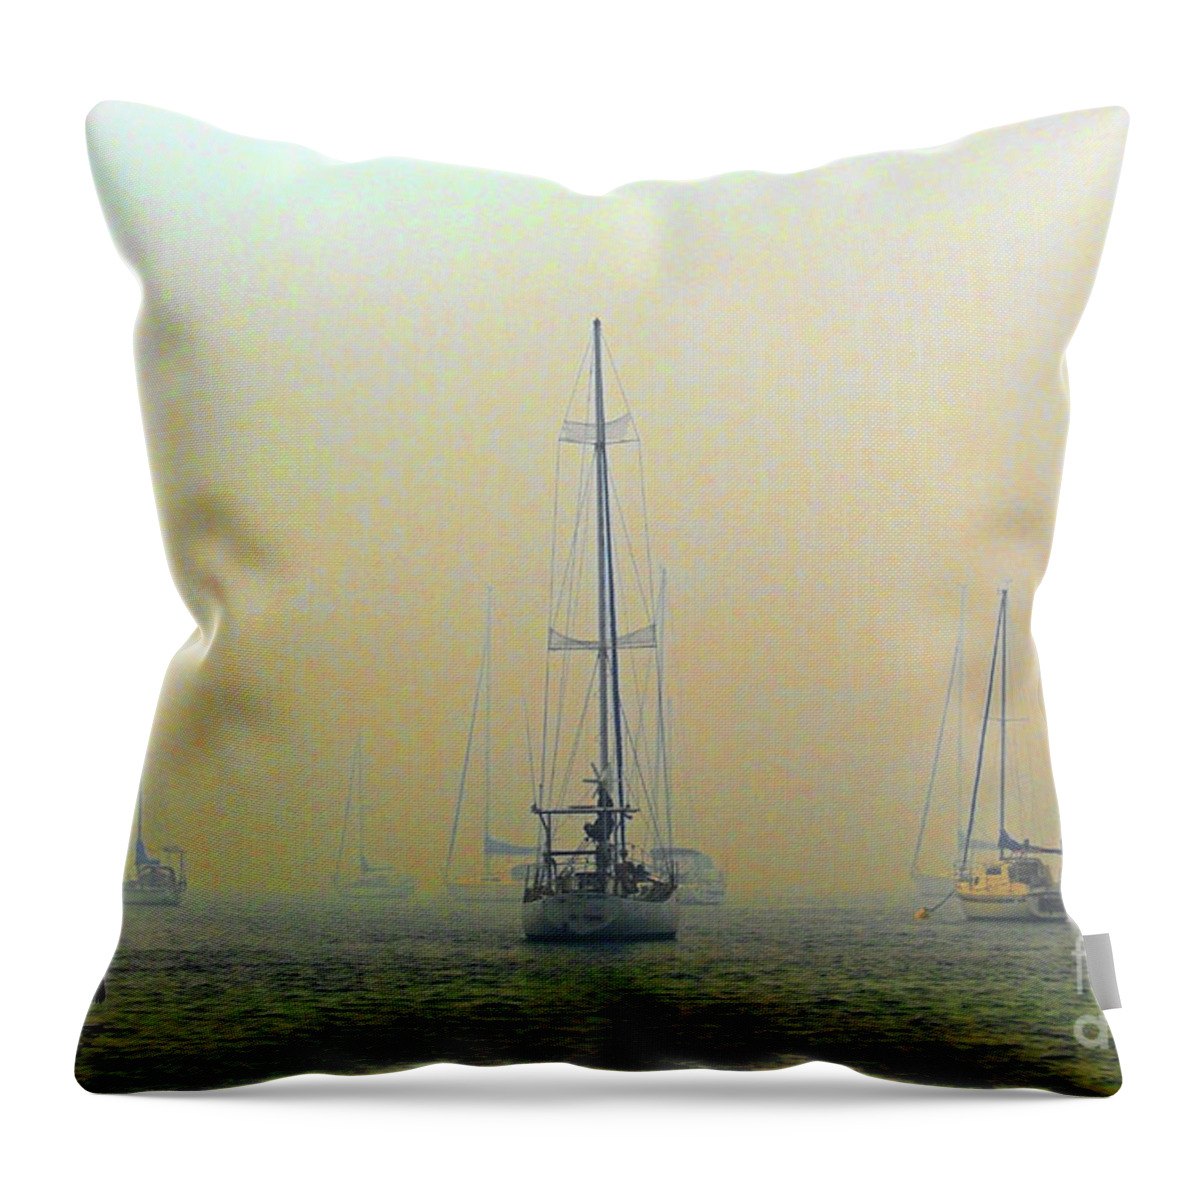 Yachts Water Throw Pillow featuring the digital art Hazy Days by Shadowlea Is